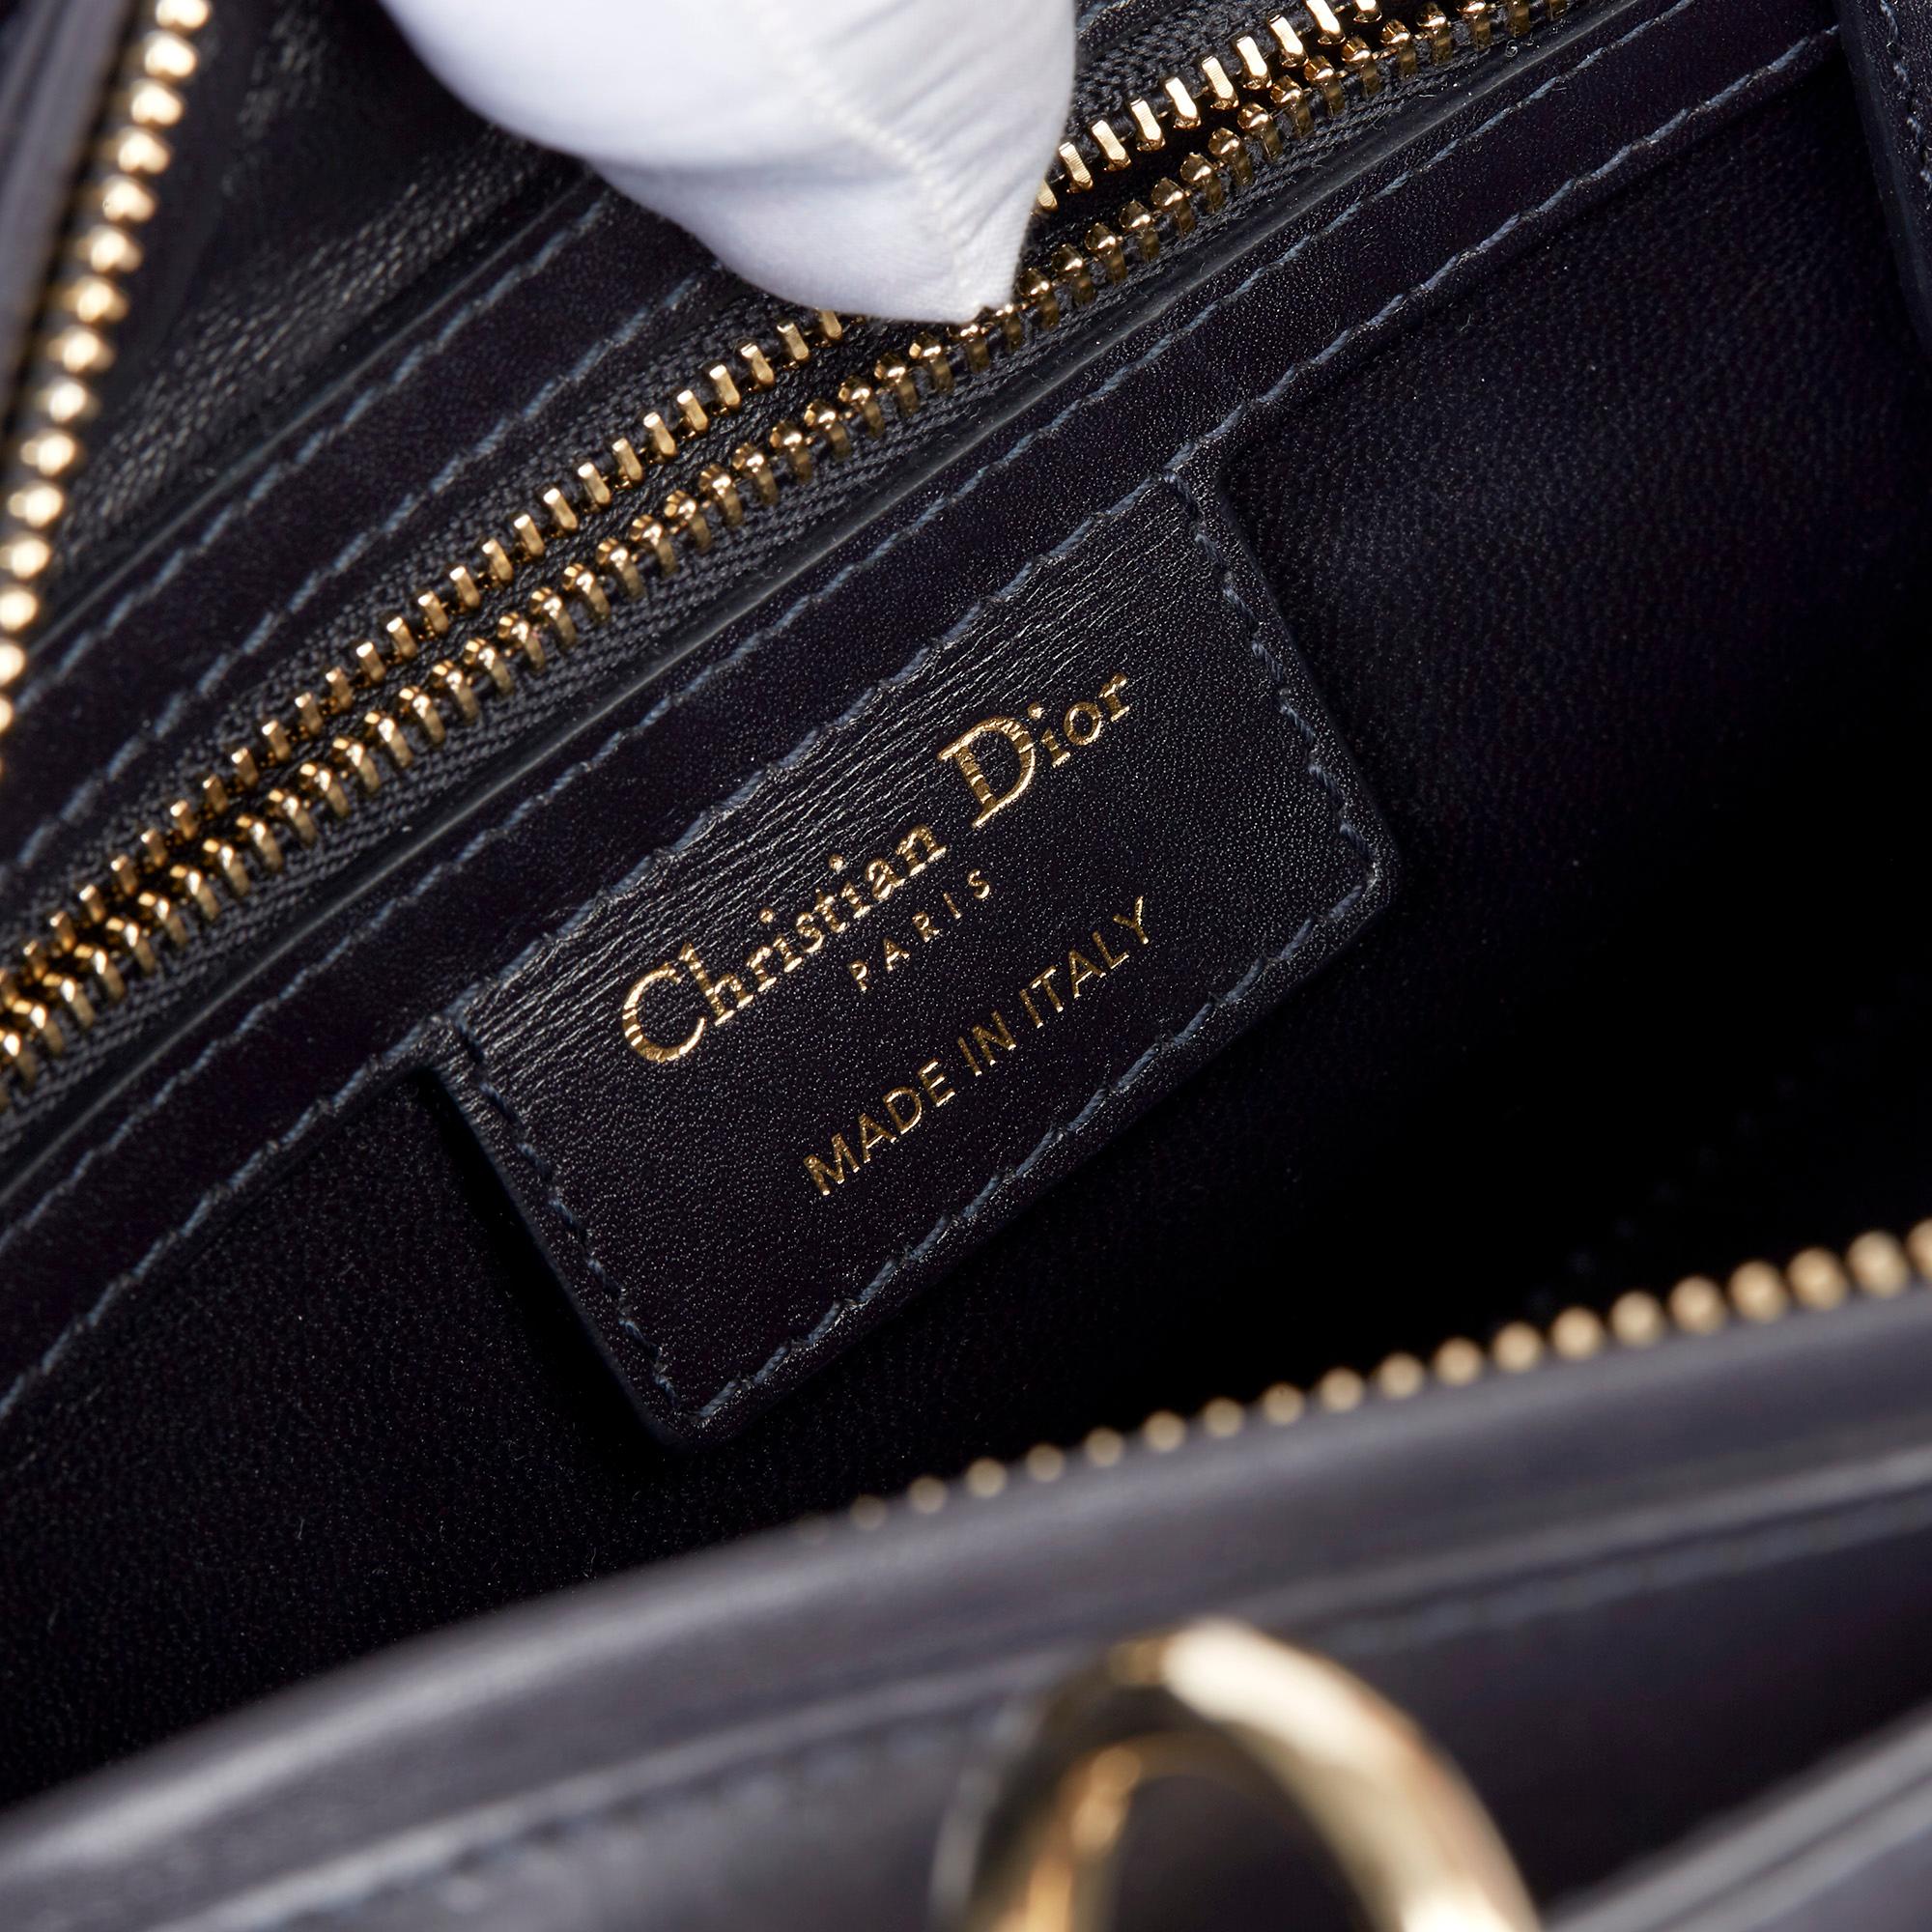 CHRISTIAN DIOR
Navy Smooth Calfskin Leather Pocket Detail Medium Lady Dior

Xupes Reference: HB3436
Serial Number: 01-BO-0164
Age (Circa): 2014
Accompanied By: Dior Dust Bag, Shoulder Strap, Authenticity Card, Care Booklet
Authenticity Details: